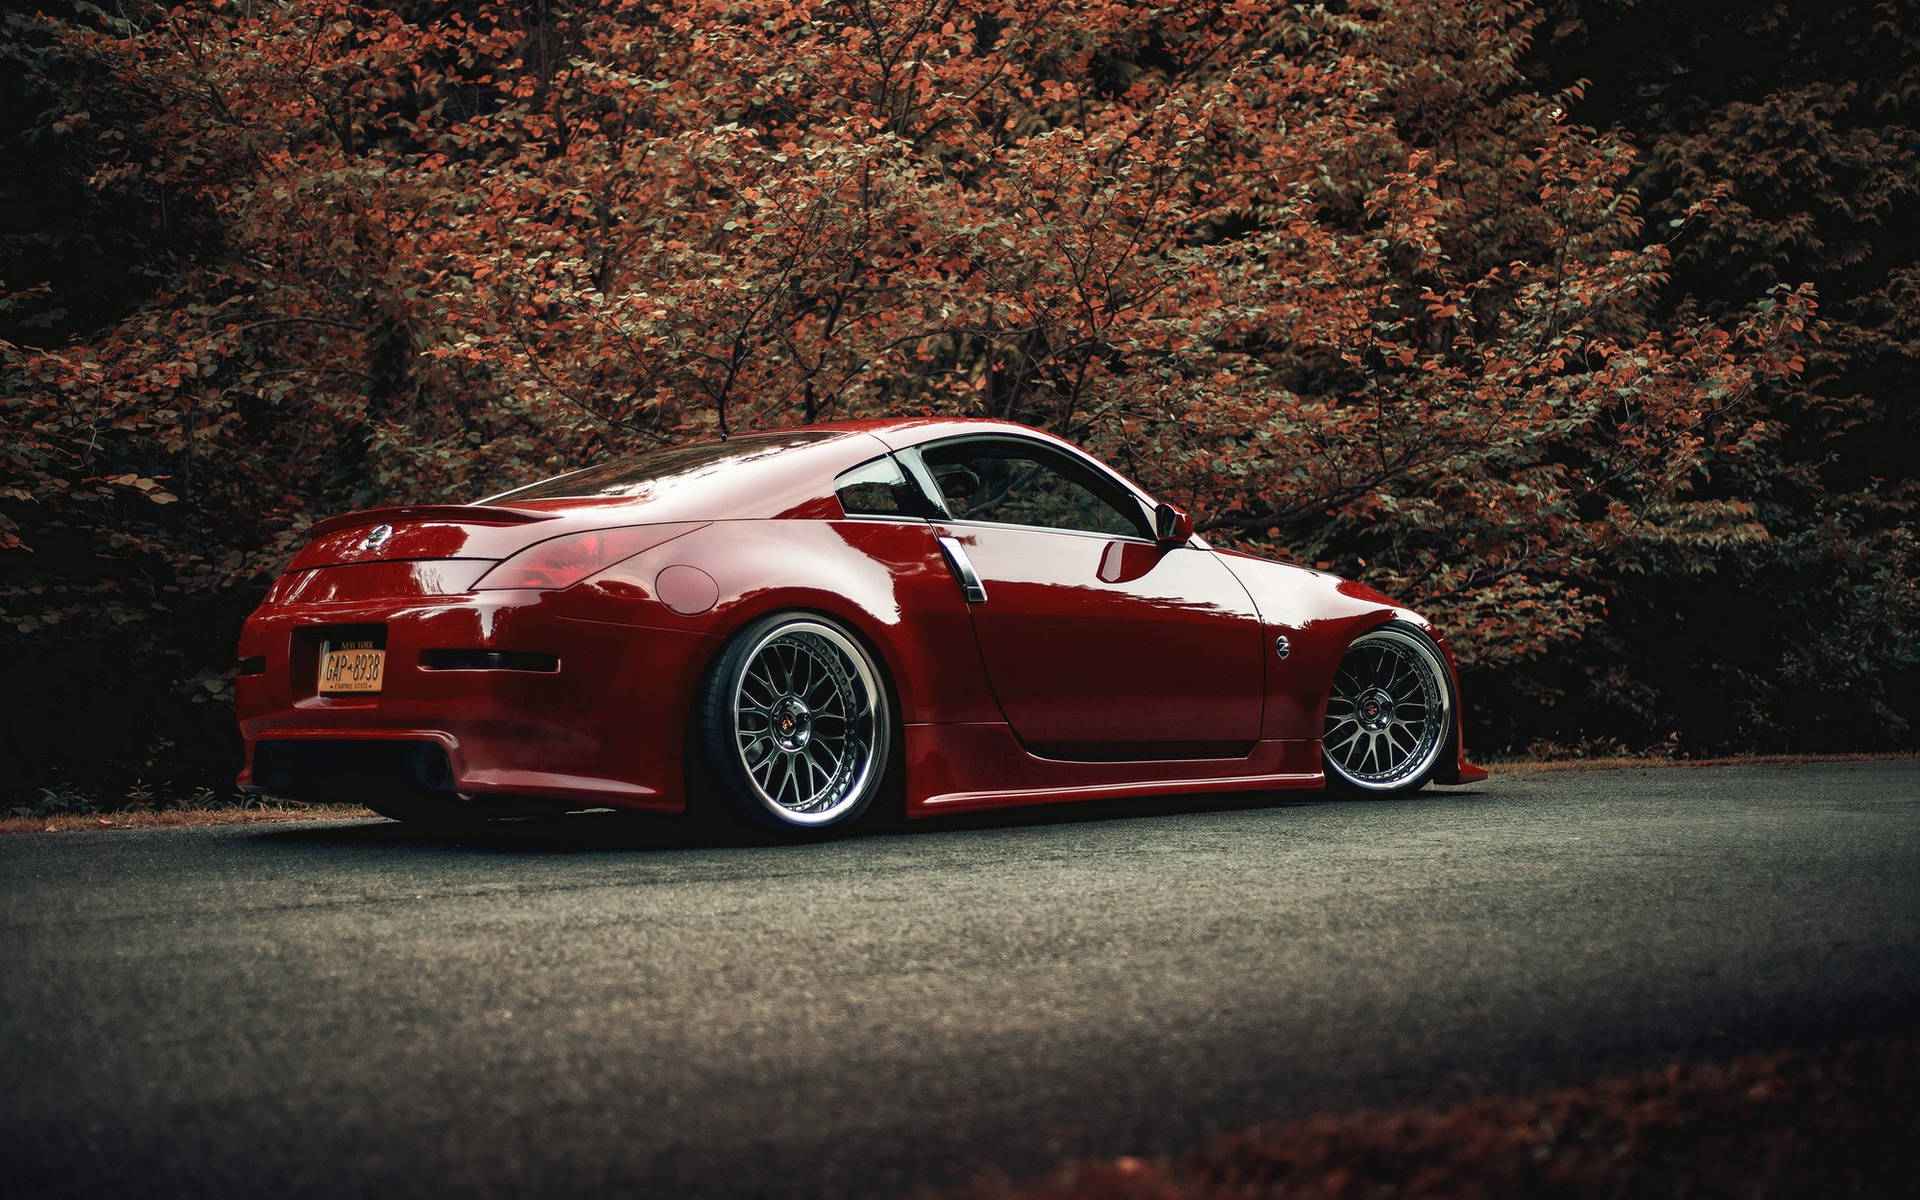 Nissan 350Z - "The Power to Turn Heads" Wallpaper